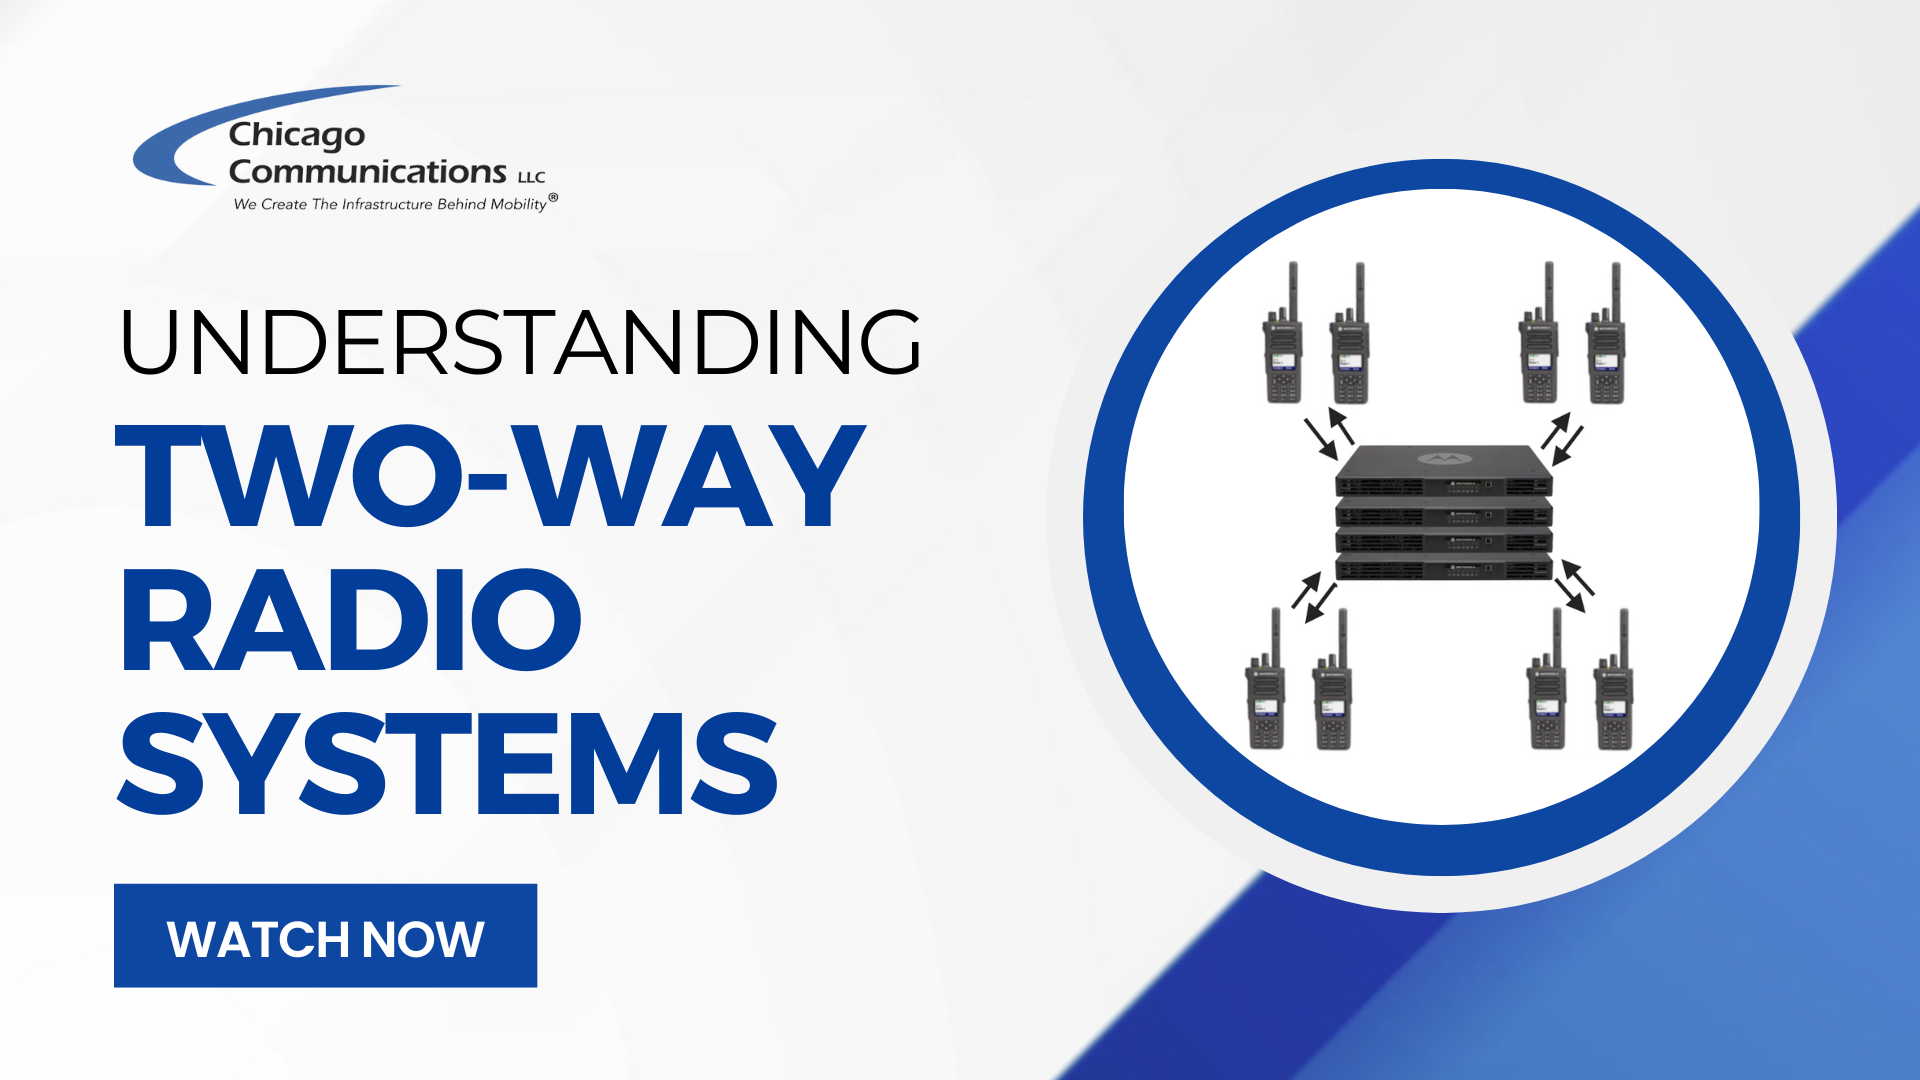 understand-two-way-radio-systems